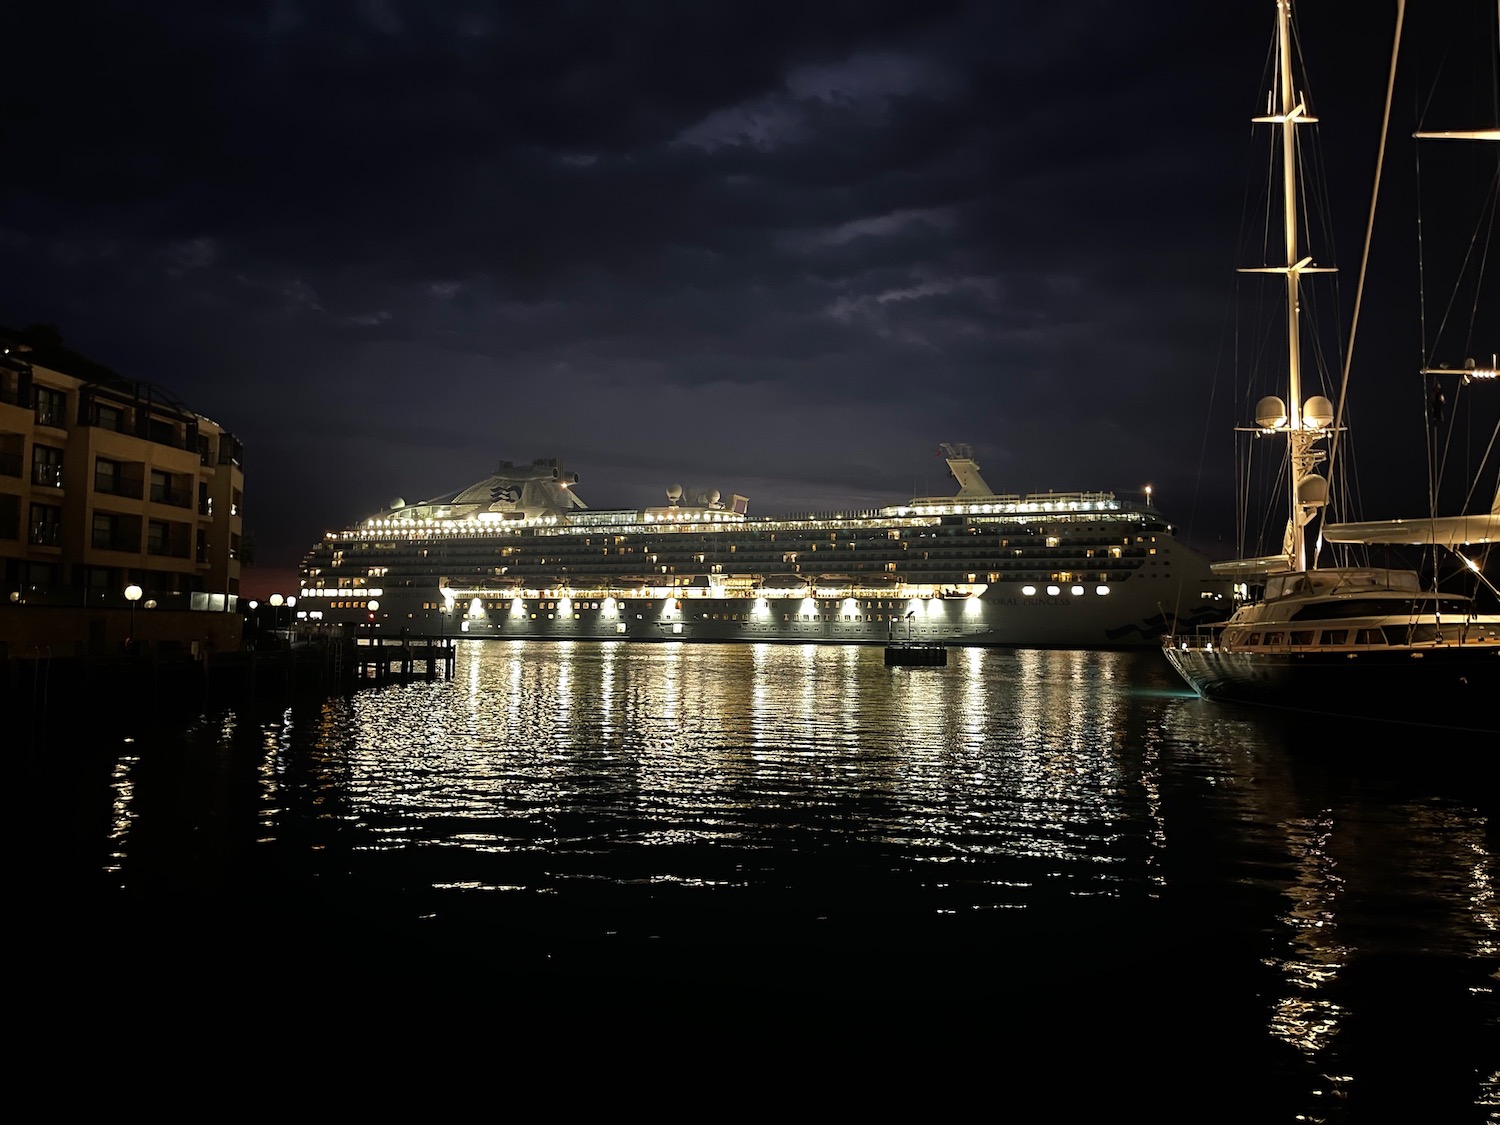 a cruise ship in a harbor at night